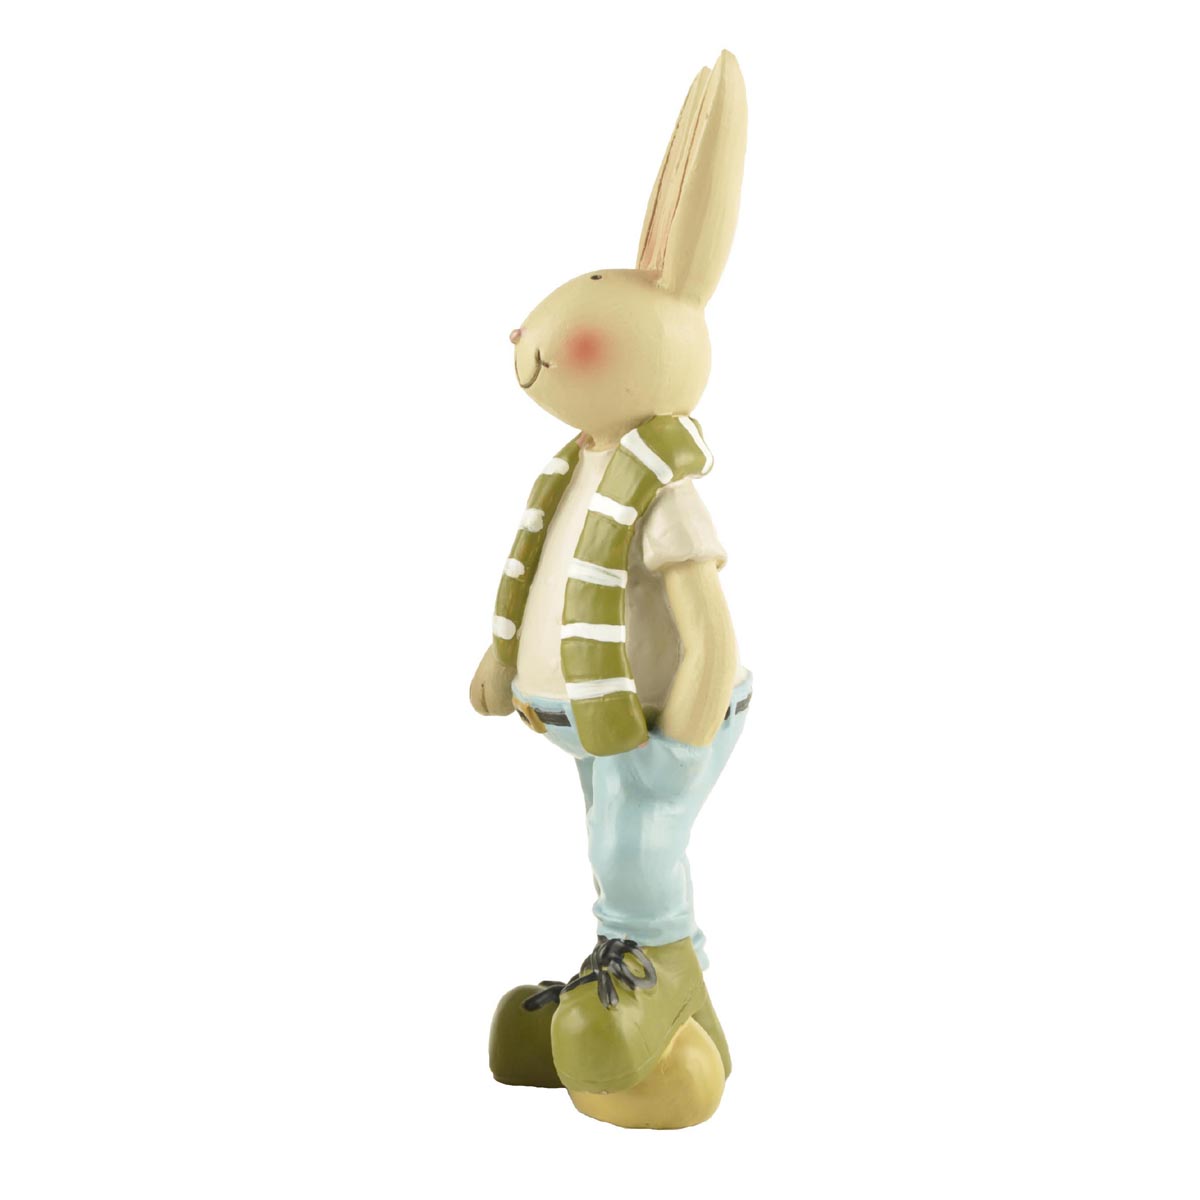 Ennas free sample easter rabbit statues handmade crafts for holiday gift-2